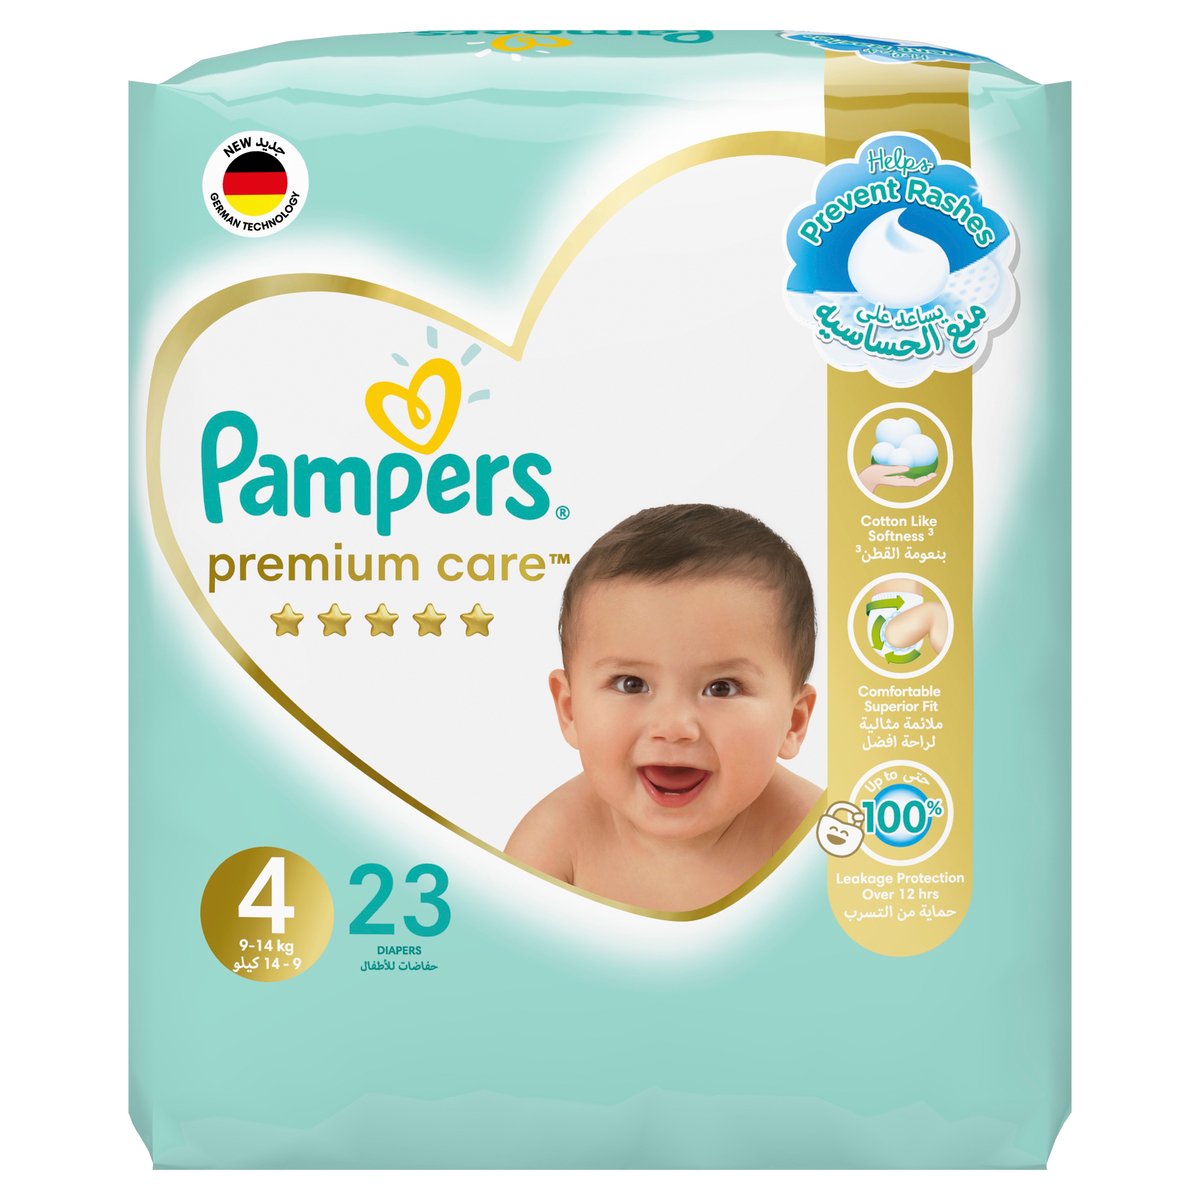 Pampers Premium Care Diapers Size 4, 9-14kg The Softest Diaper 23pcs